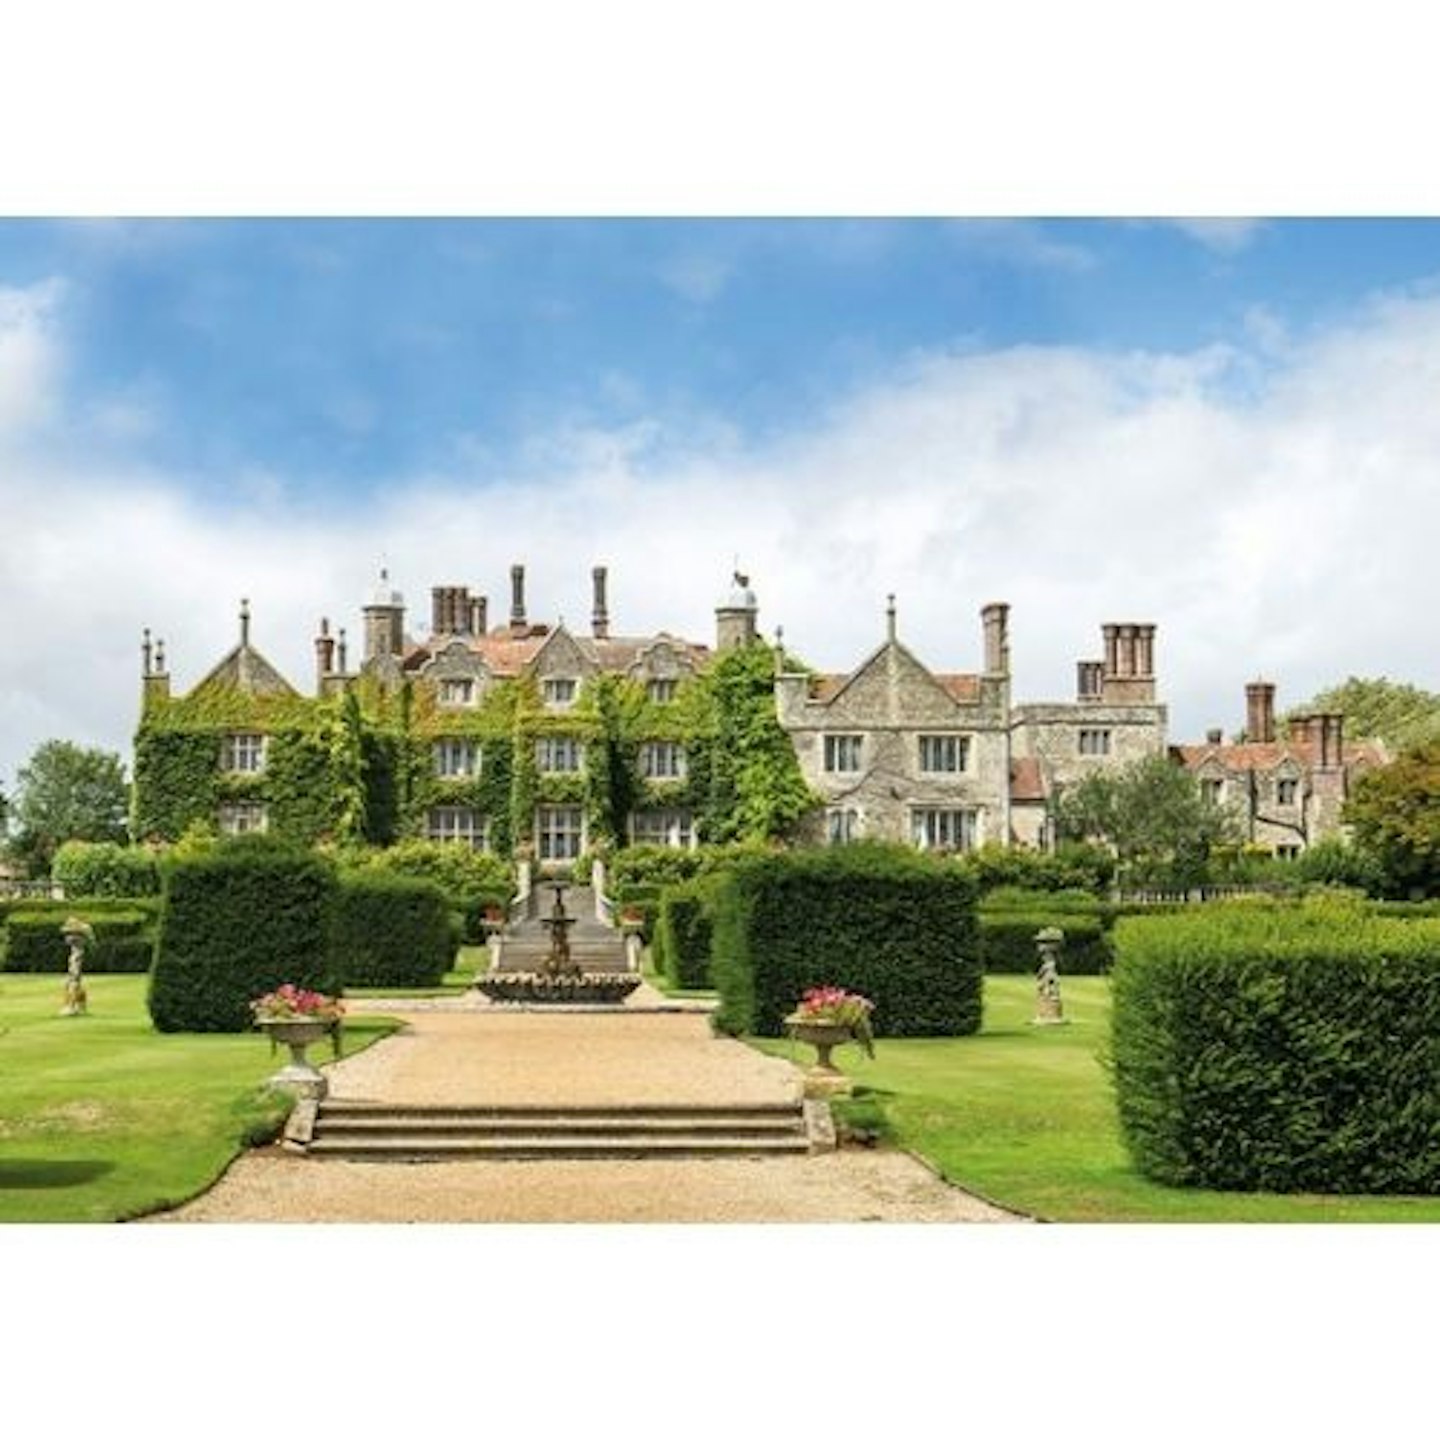 One Night Spa Break with Dining for Two at Champneys Eastwell Manor